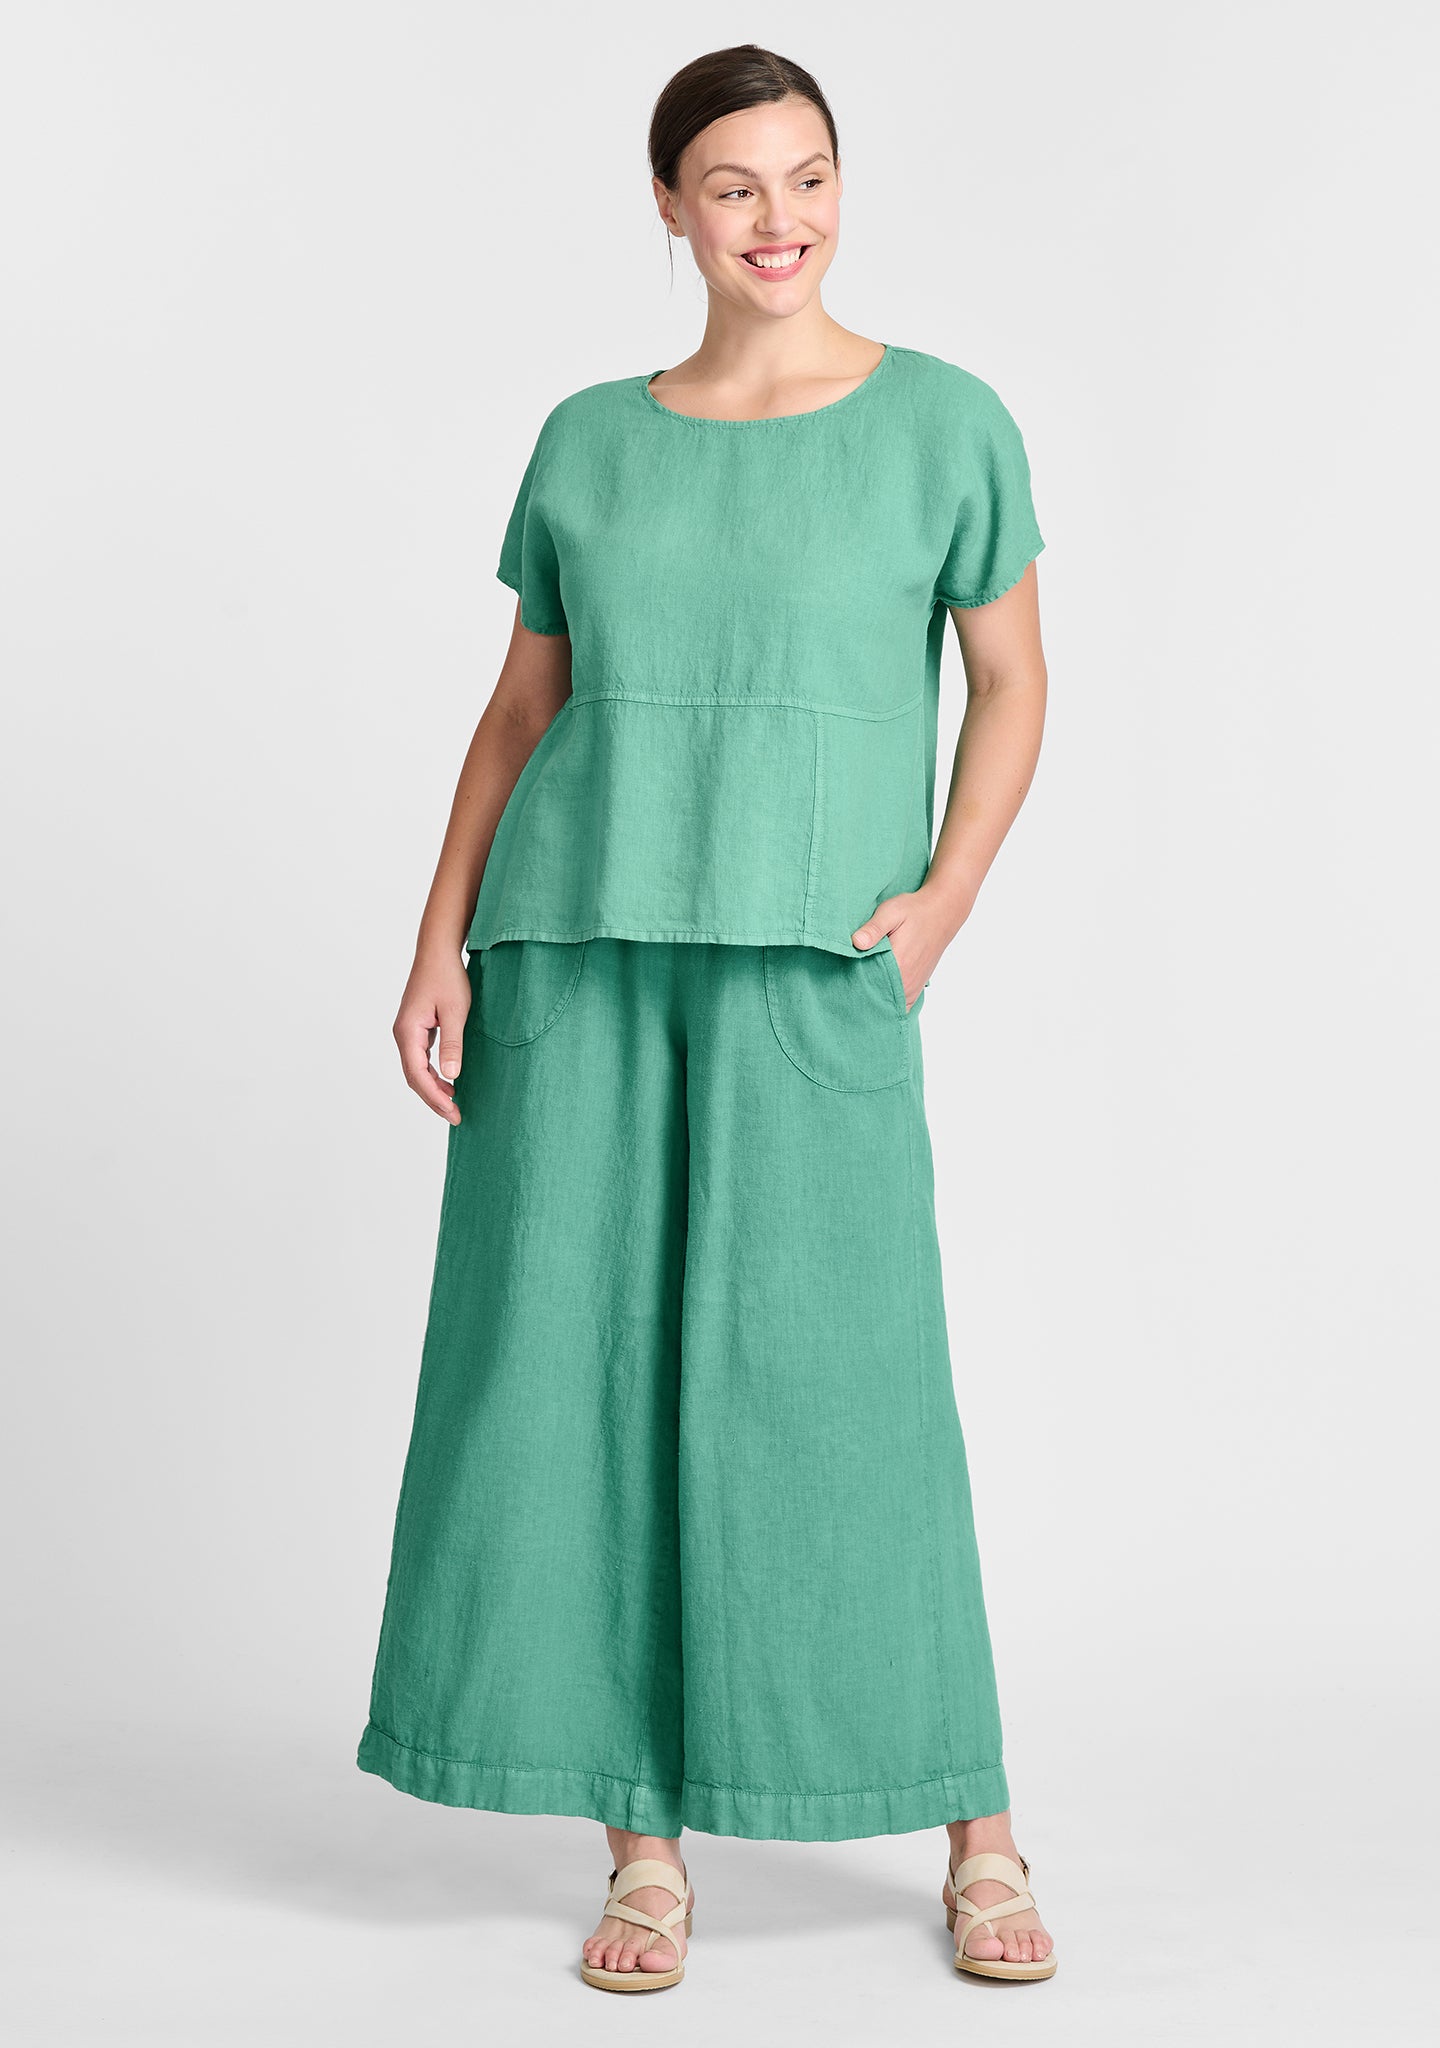 FLAX linen shirt in green with linen pants in green